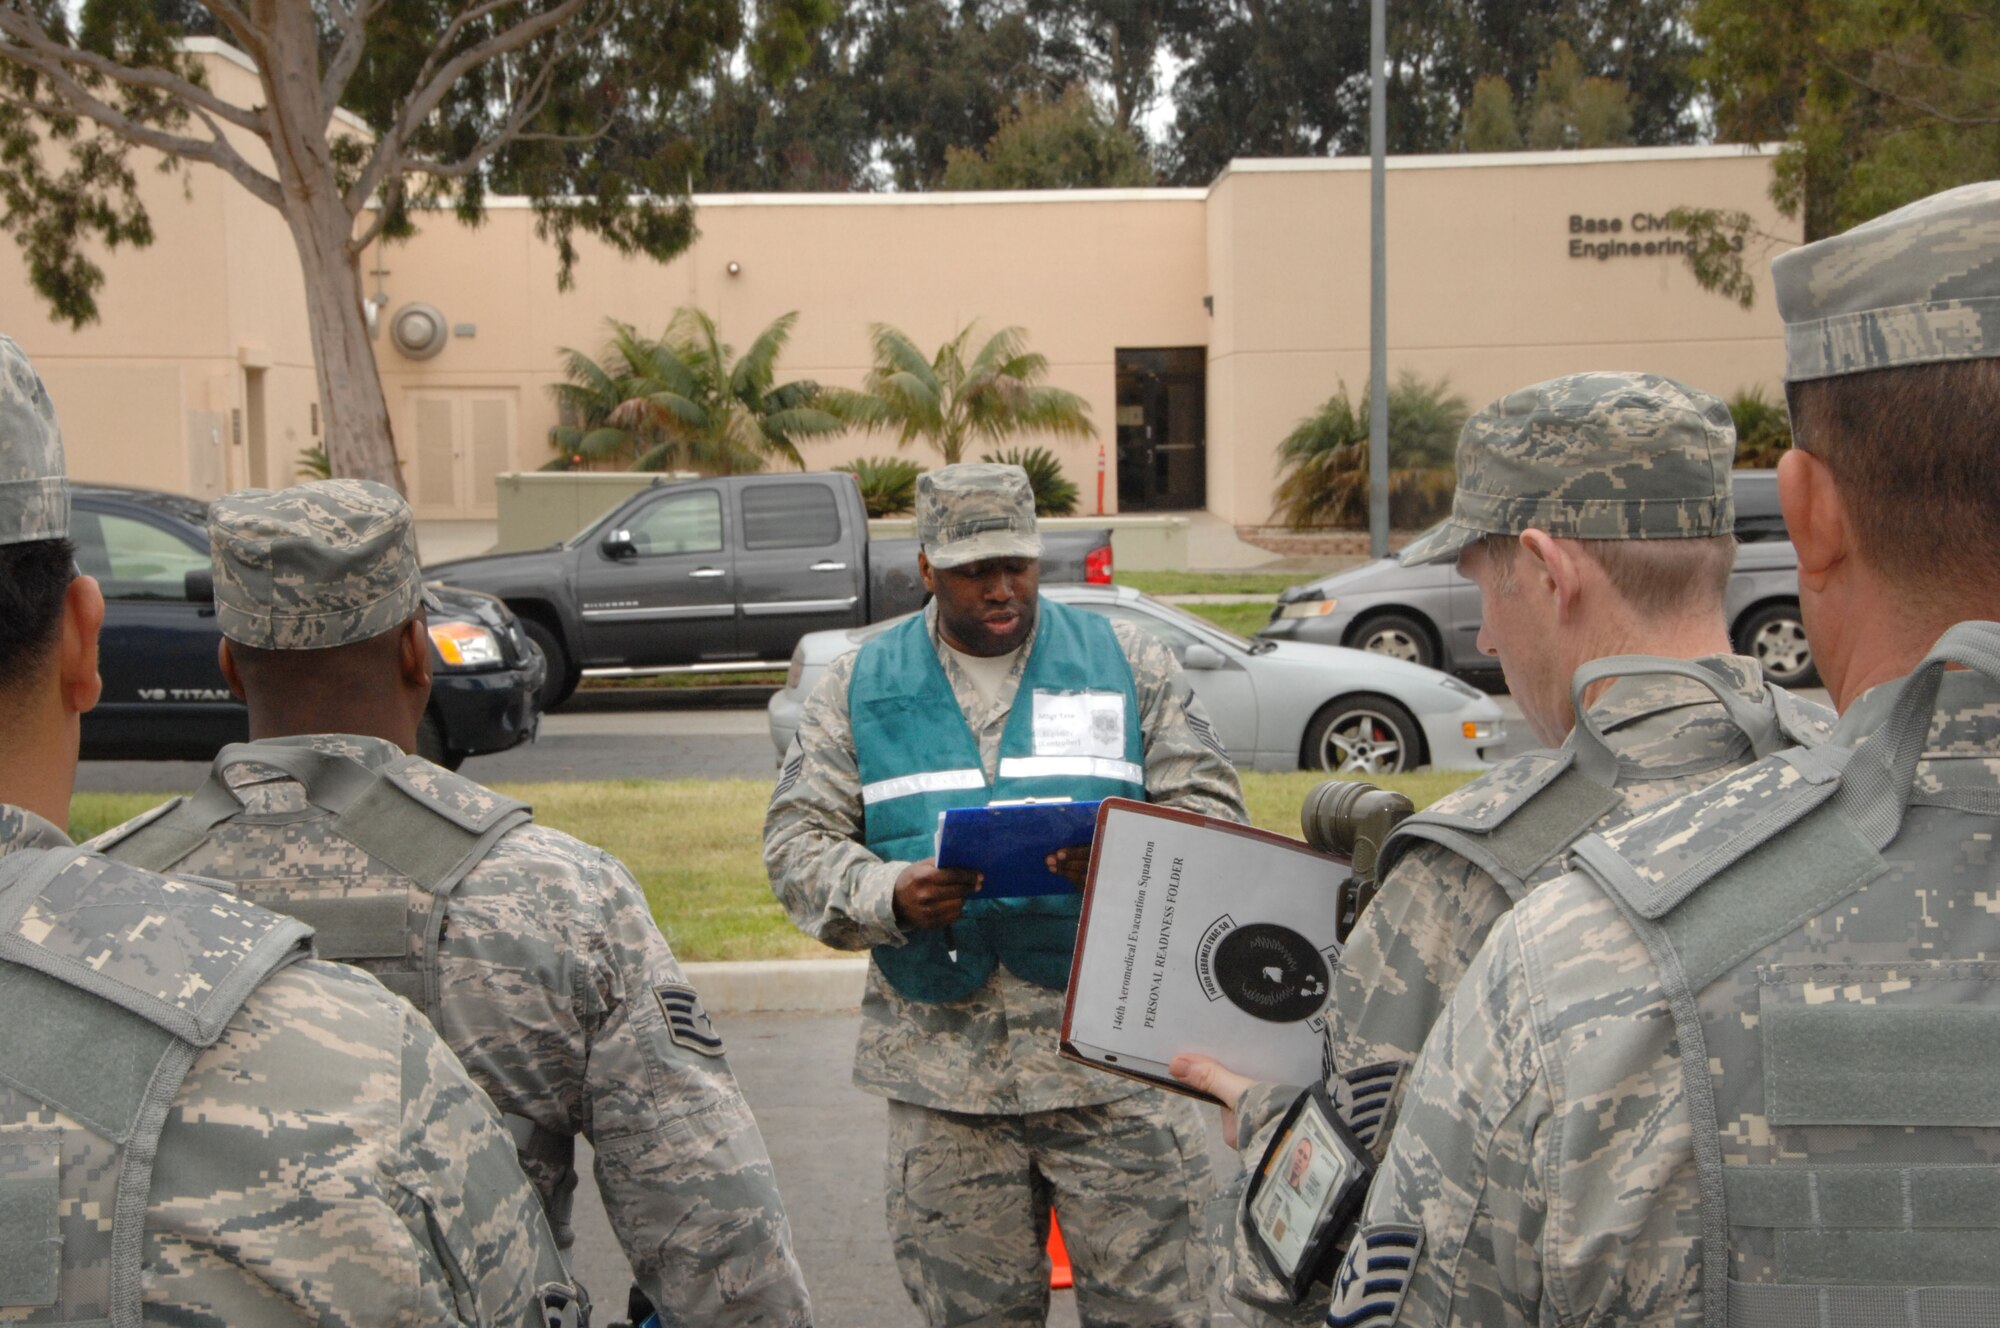 Master Sgt. Jeromee Tate briefs a team of combined Airmen known as Chalk 6 during a prepare the force exercise for an upcoming ORI (Operational Readiness Inspection) at the 146th Airlift Wing located in Port Hueneme, Calif. March 3, 2012. (U.S. Air Force photo by: Senior Airman Nicholas Carzis)